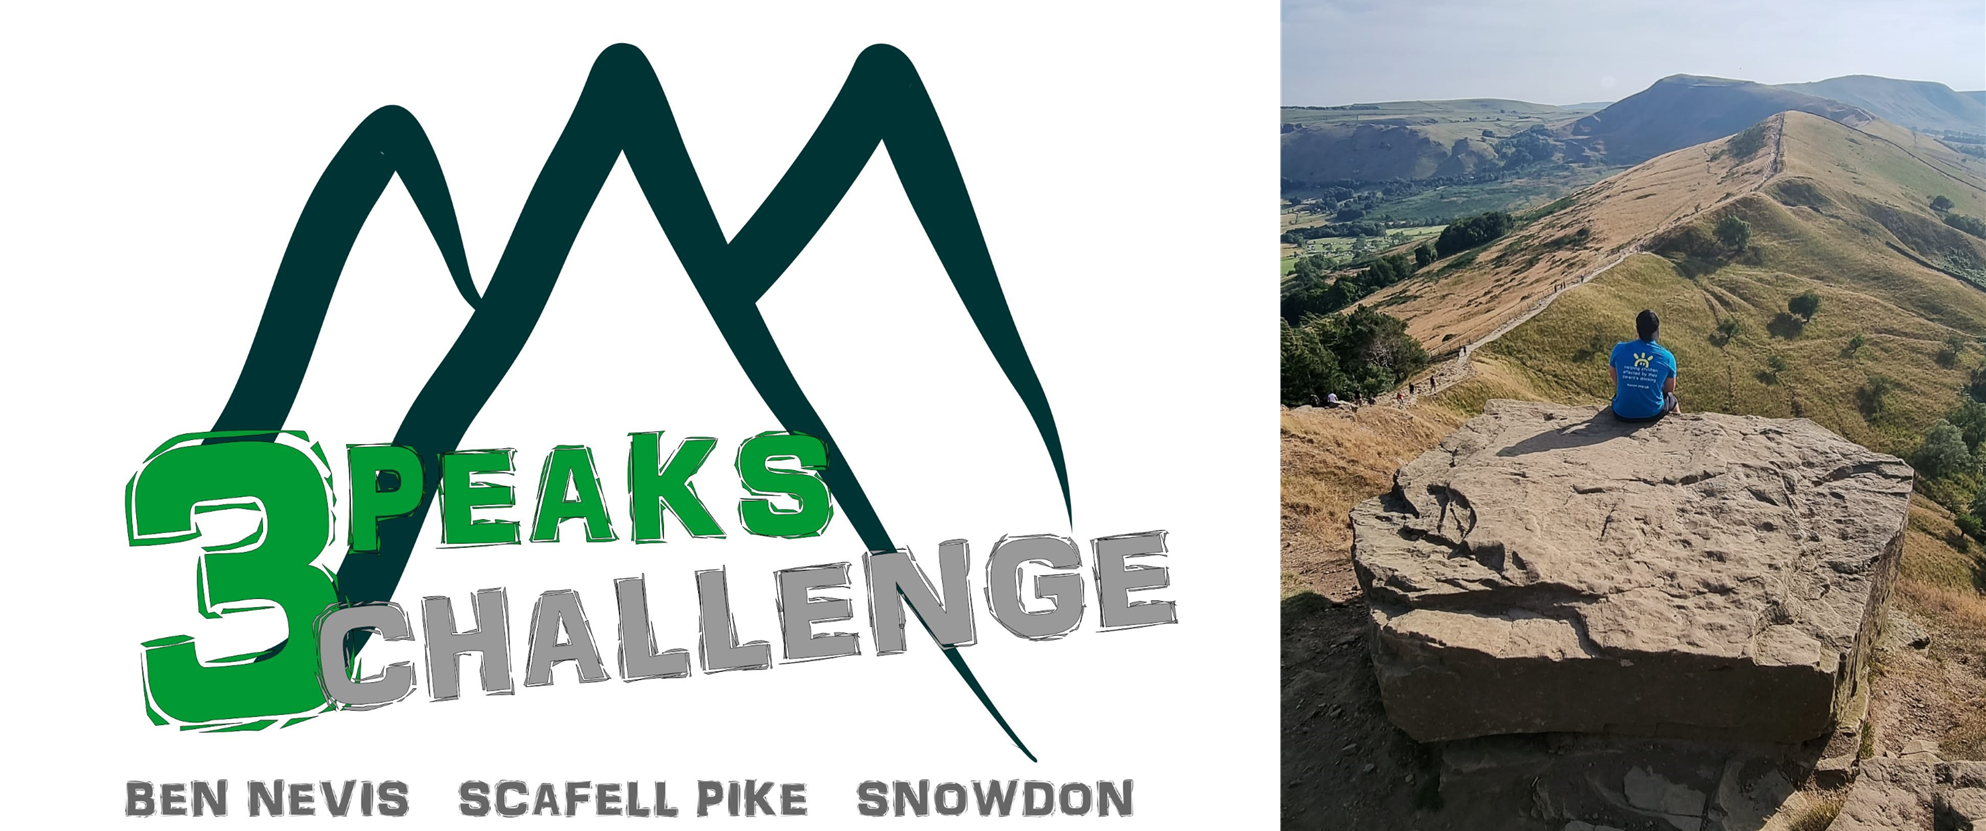 Labels Plus Donates For National Three Peaks Challenge